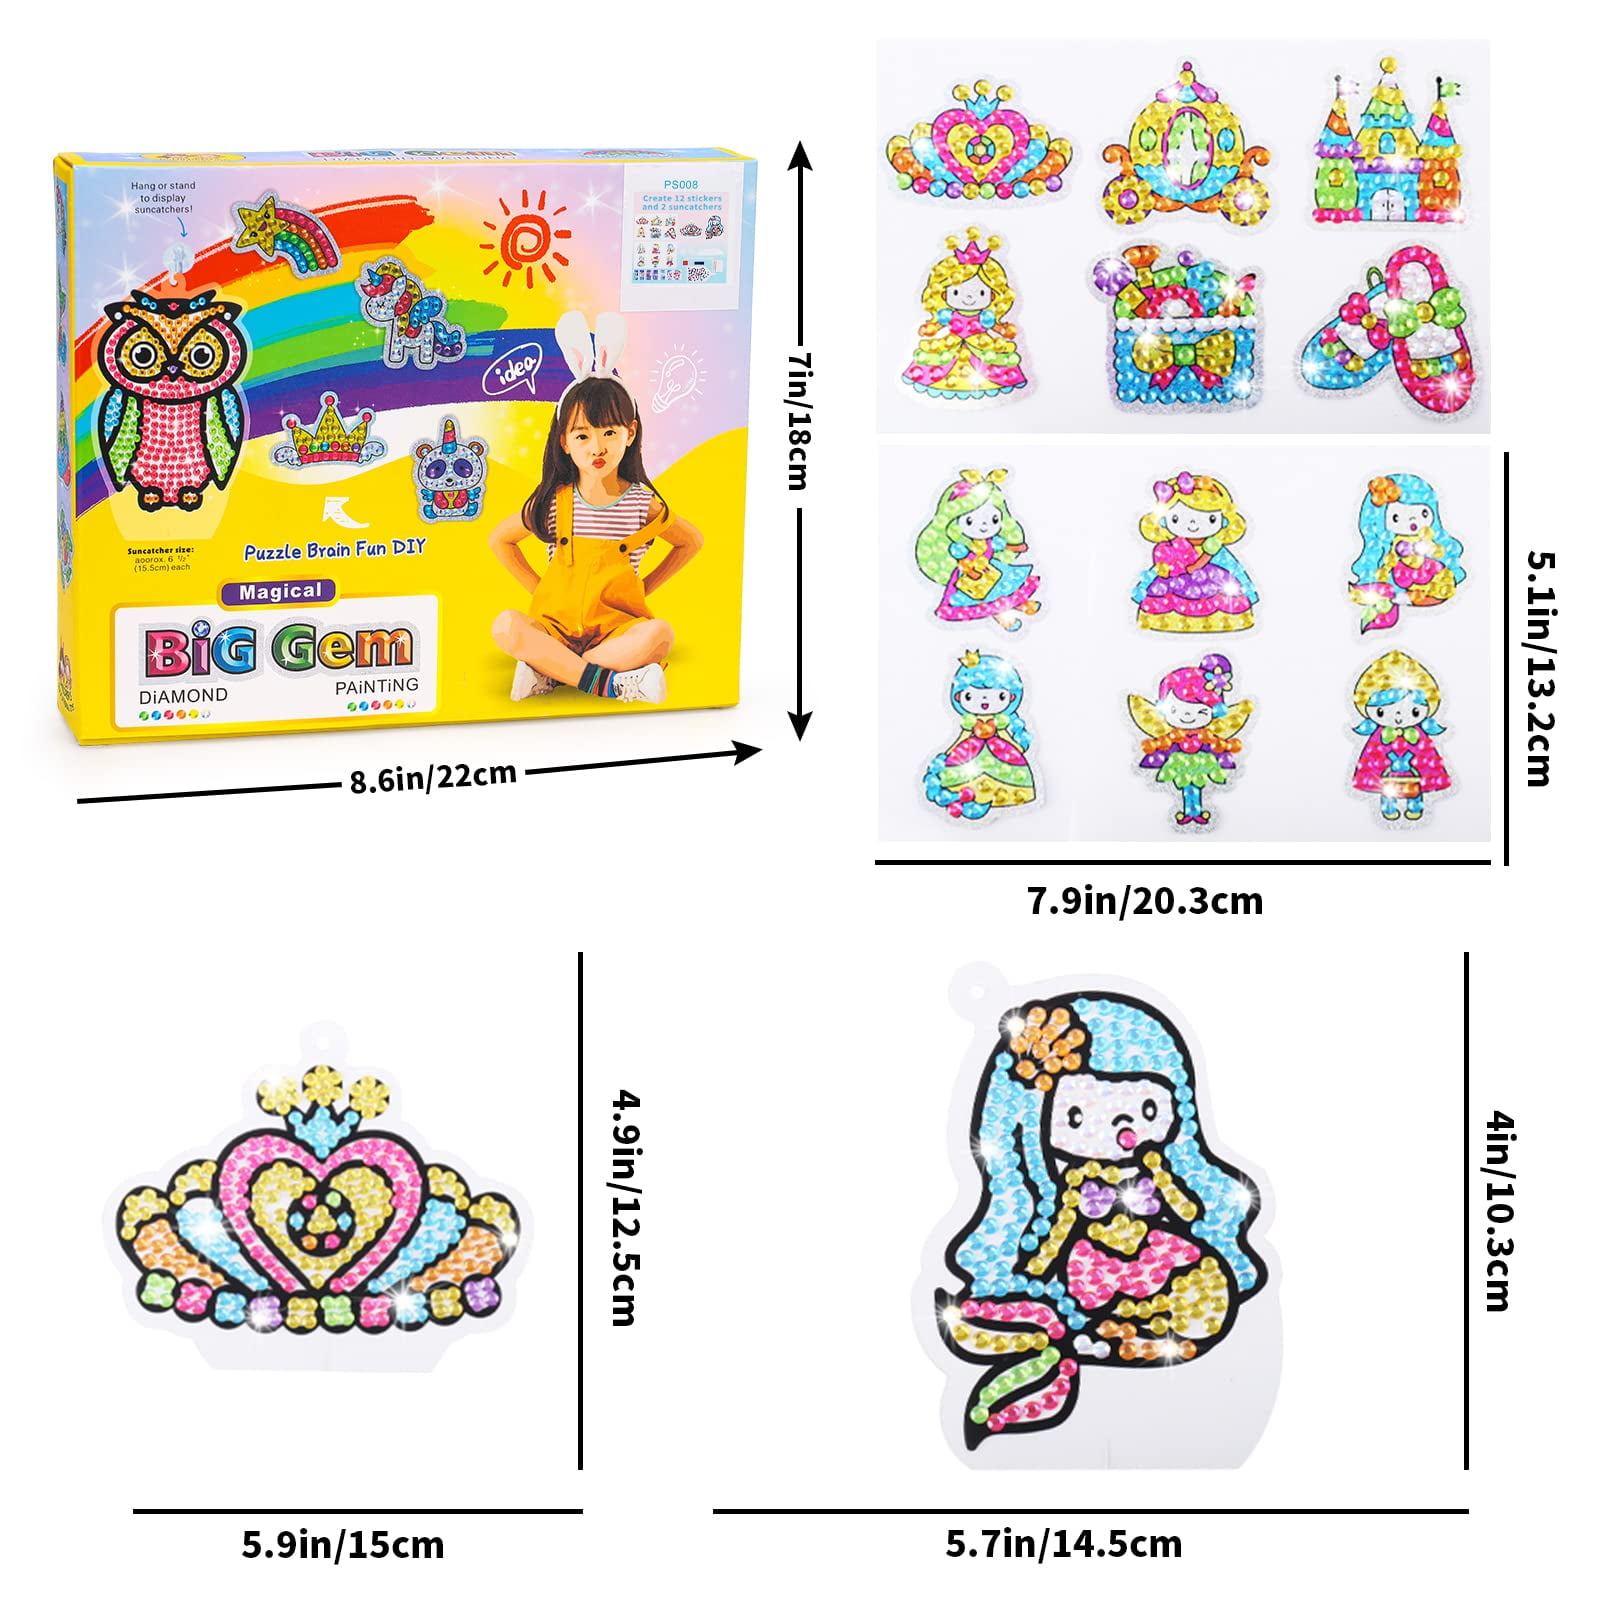  ROYUYE Diamond Painting Kit for Kids,Cute Diamond Painting  Stickers Suncatchers, Arts and Crafts for Kids Ages 8-12,Girls Toys Age 6-8  Girls Gifts Ideas for 6,7,8,9,10-12 Year Old : Toys & Games